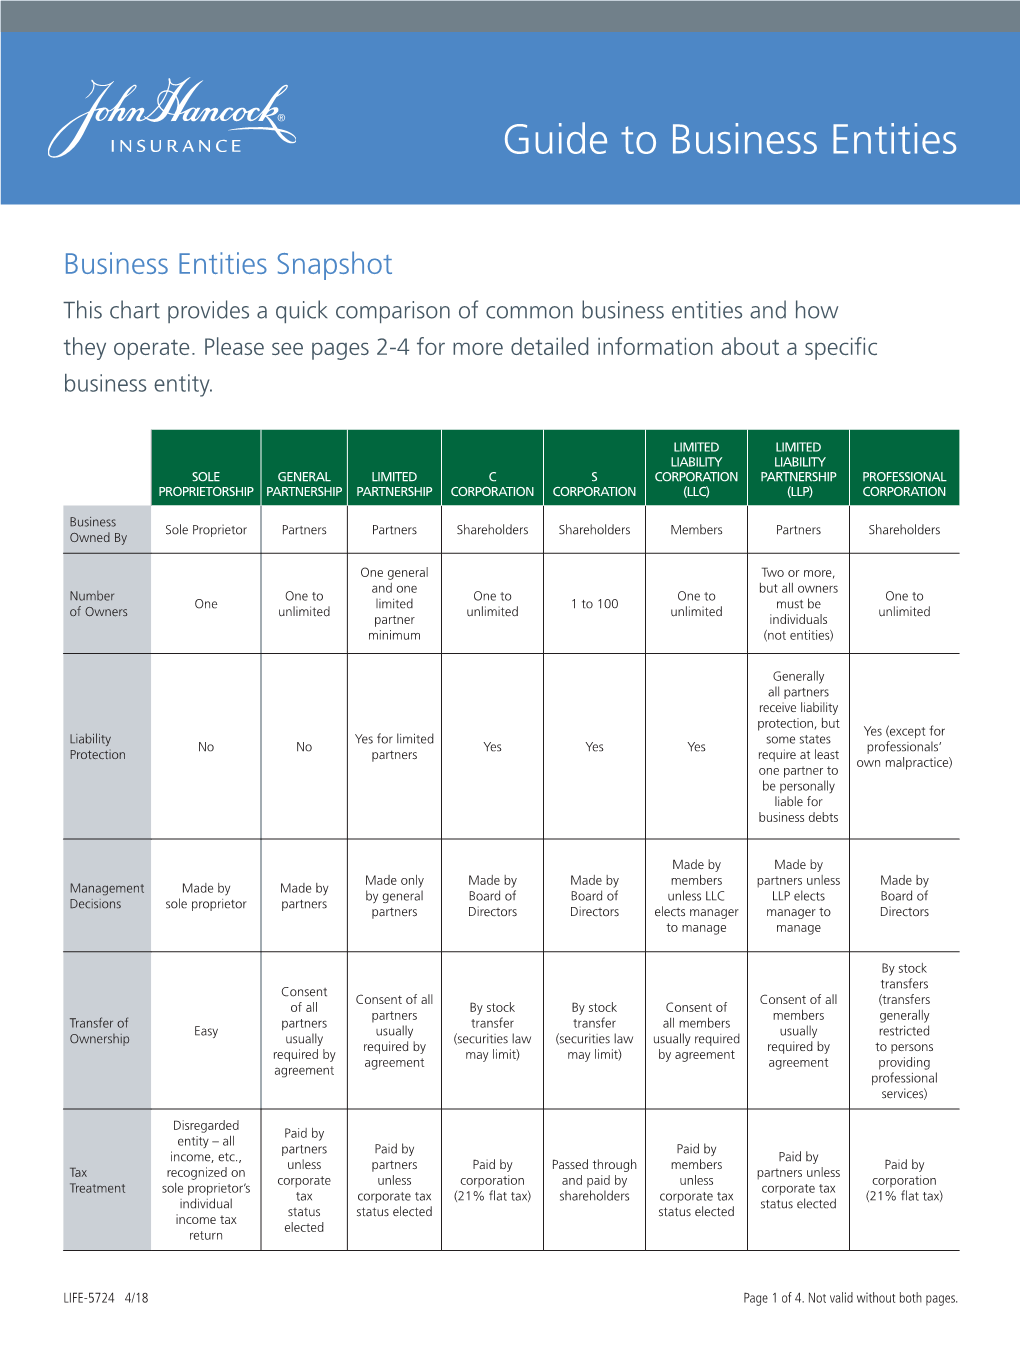 Guide to Business Entities